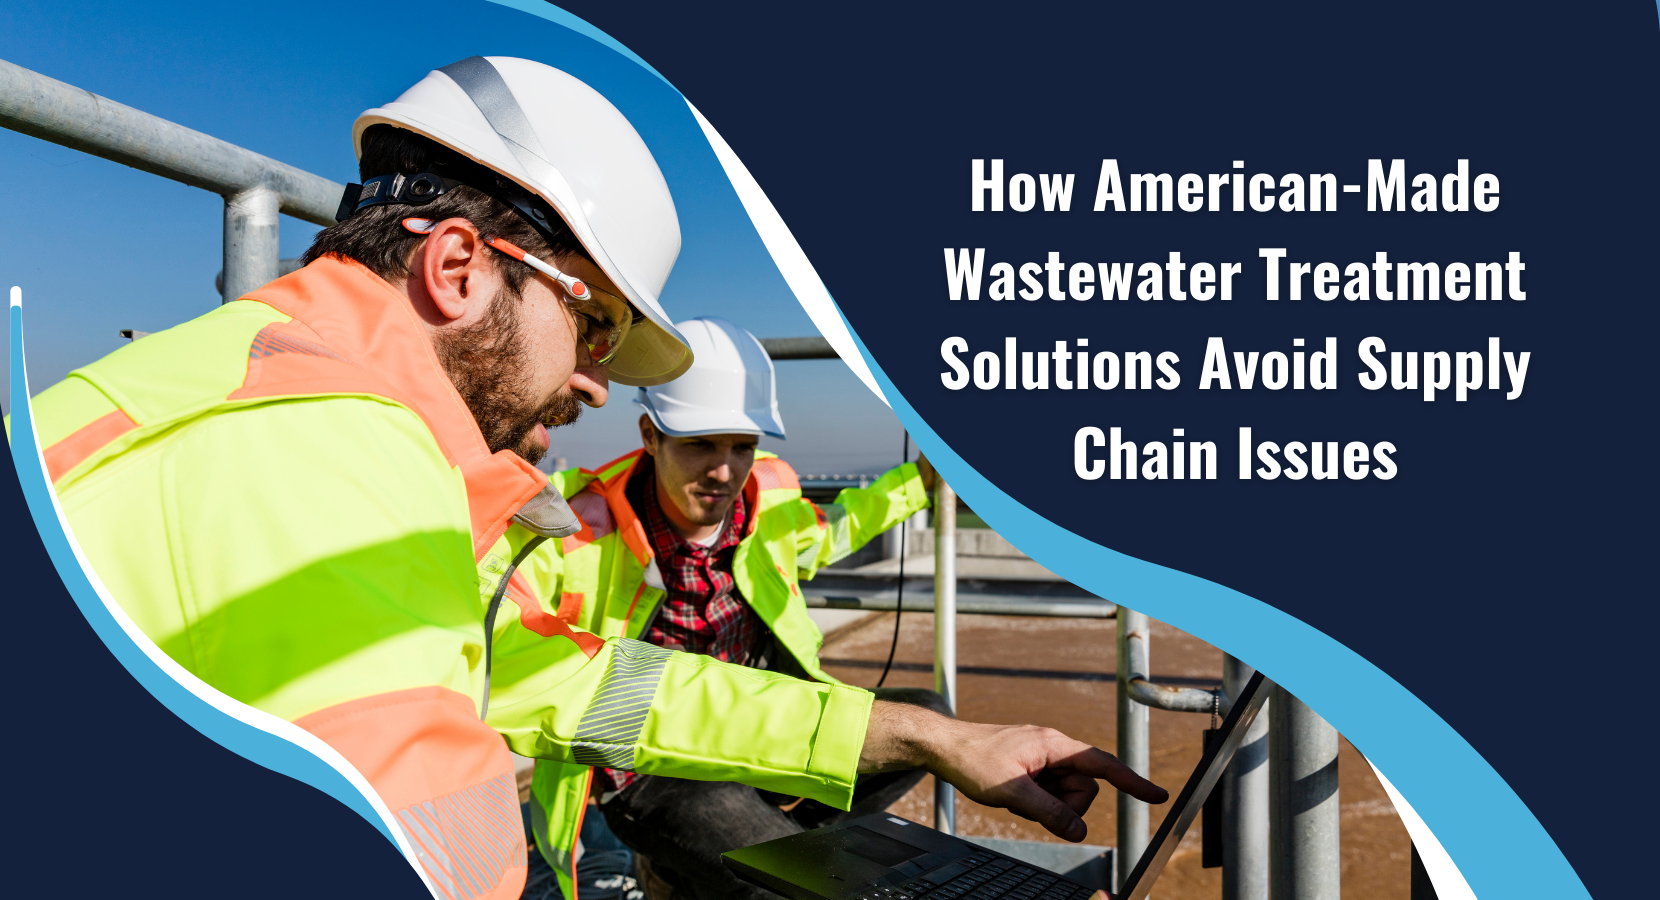 Featured image for “How American-Made Wastewater Treatment Solutions Avoid Supply Chain Issues”